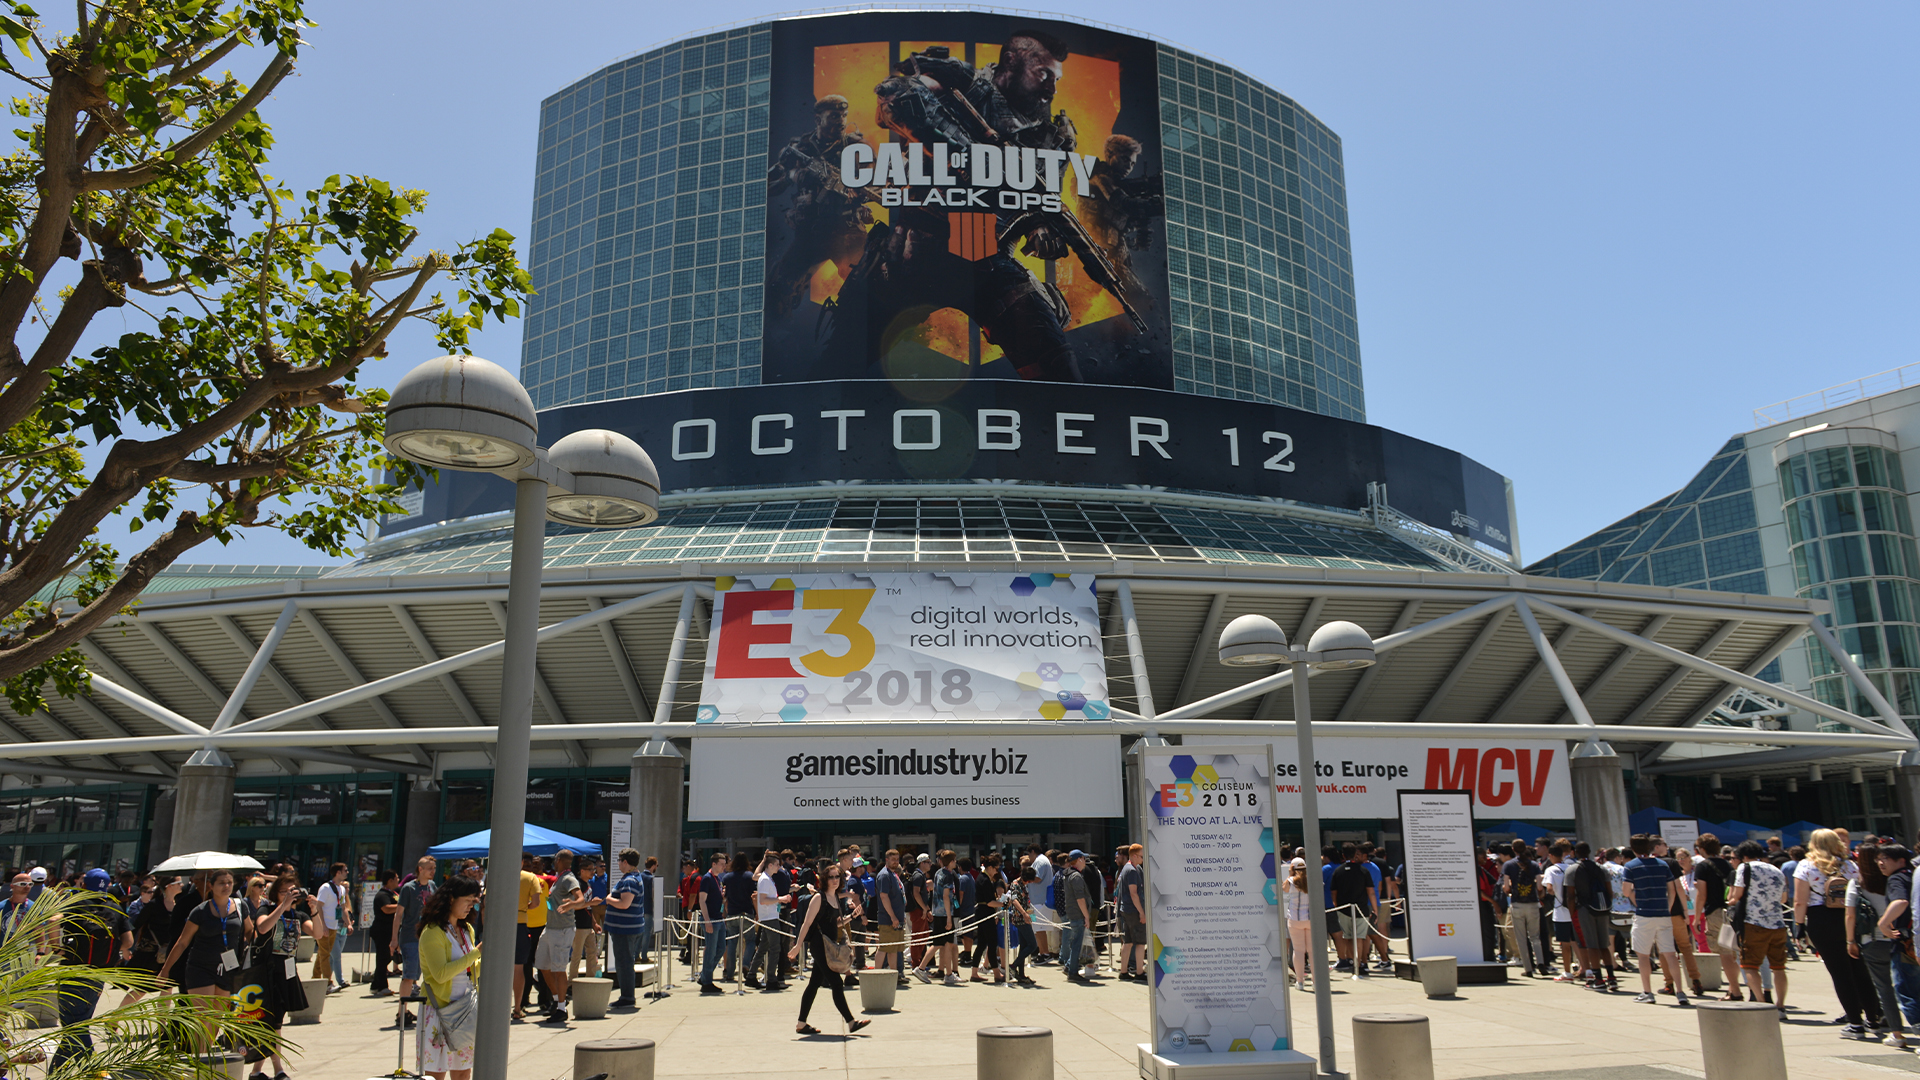 Here’s the full E3 2019 press conference schedule